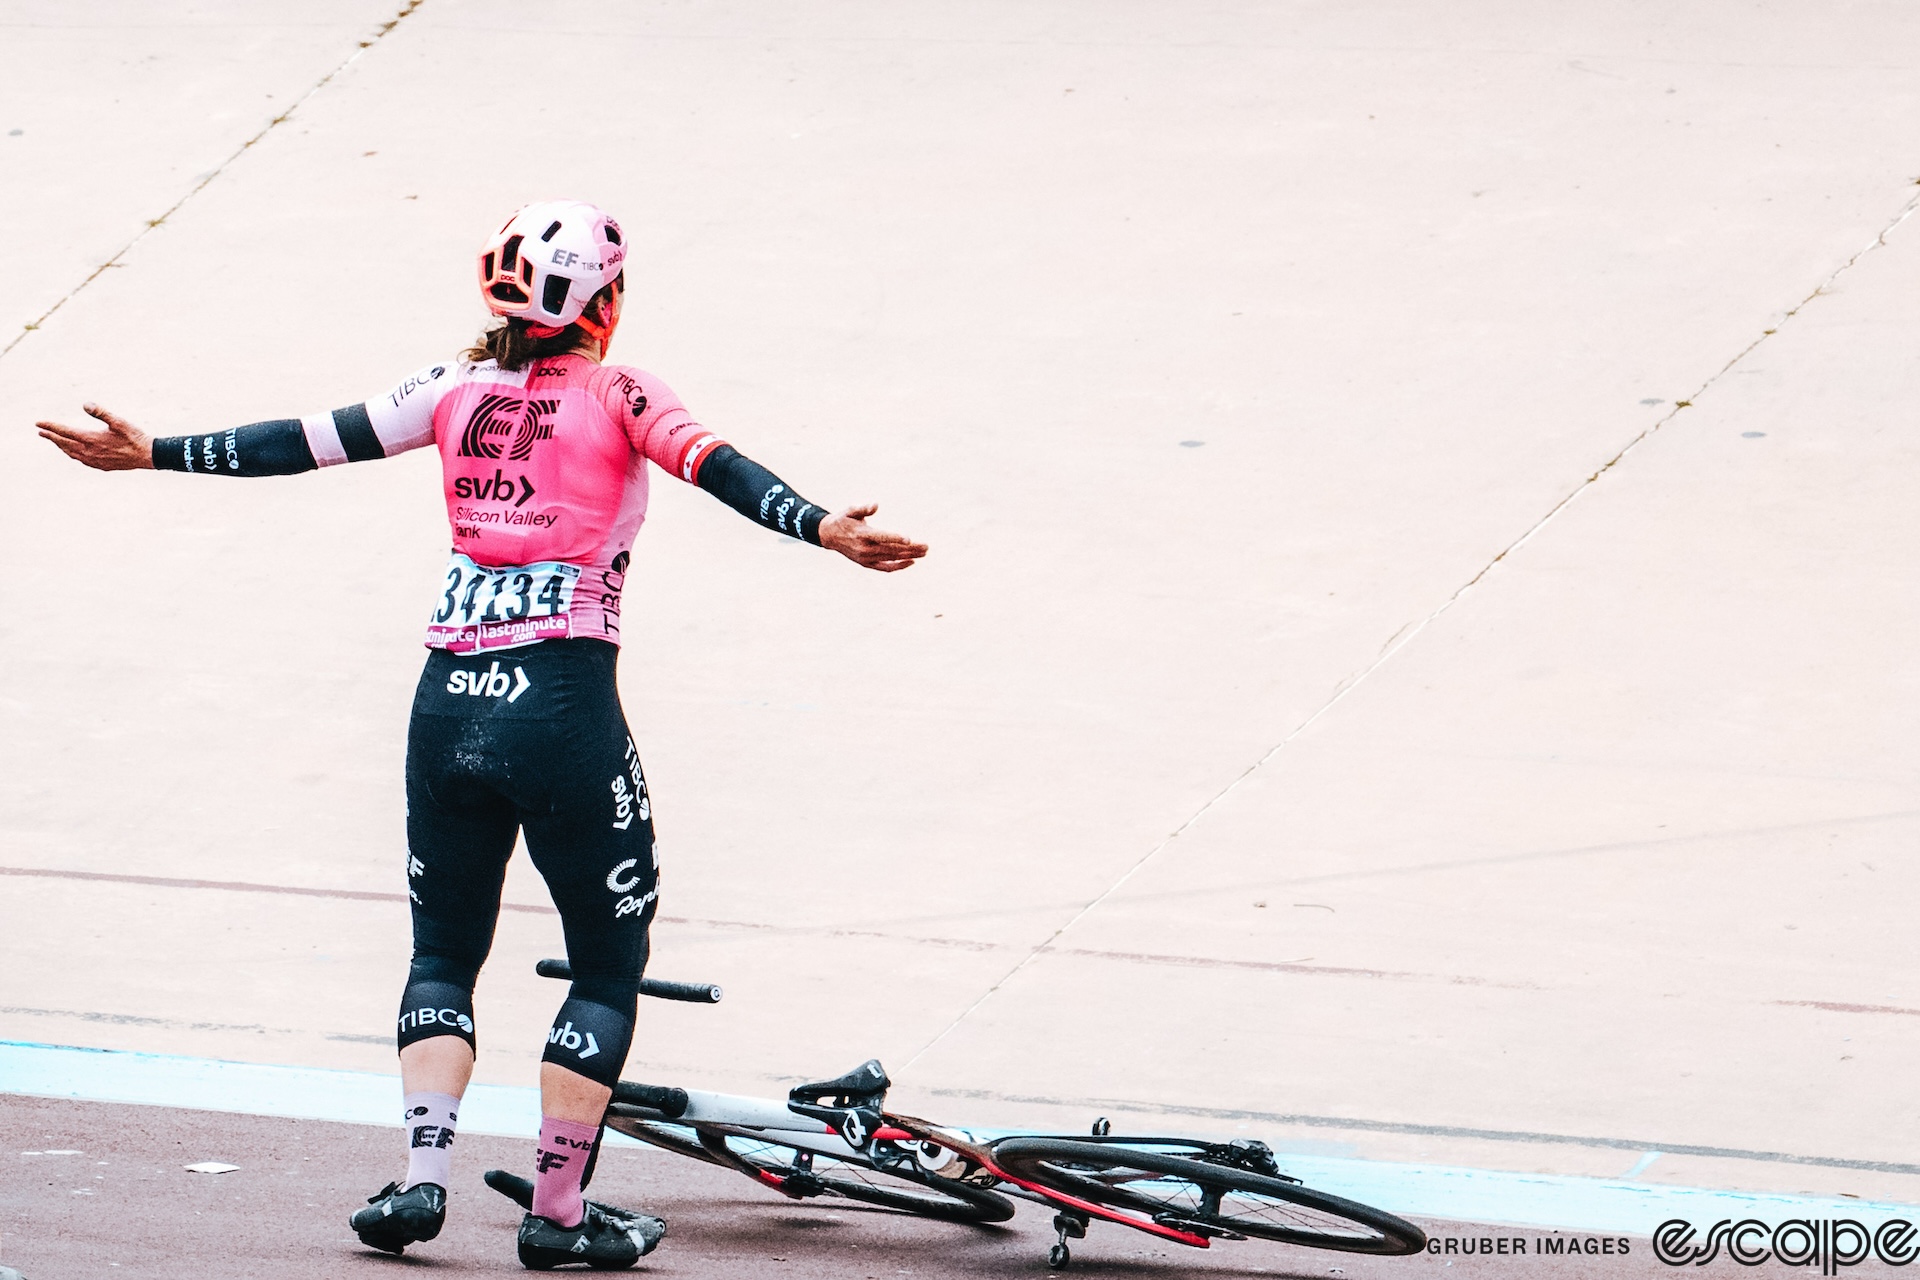 Alison Jackson throws her arms wide in celebration after winning the 2023 Paris-Roubaix Femmes. She stands in front of her bike, lying on its side in the velodrome, as she gestures to the crowd.